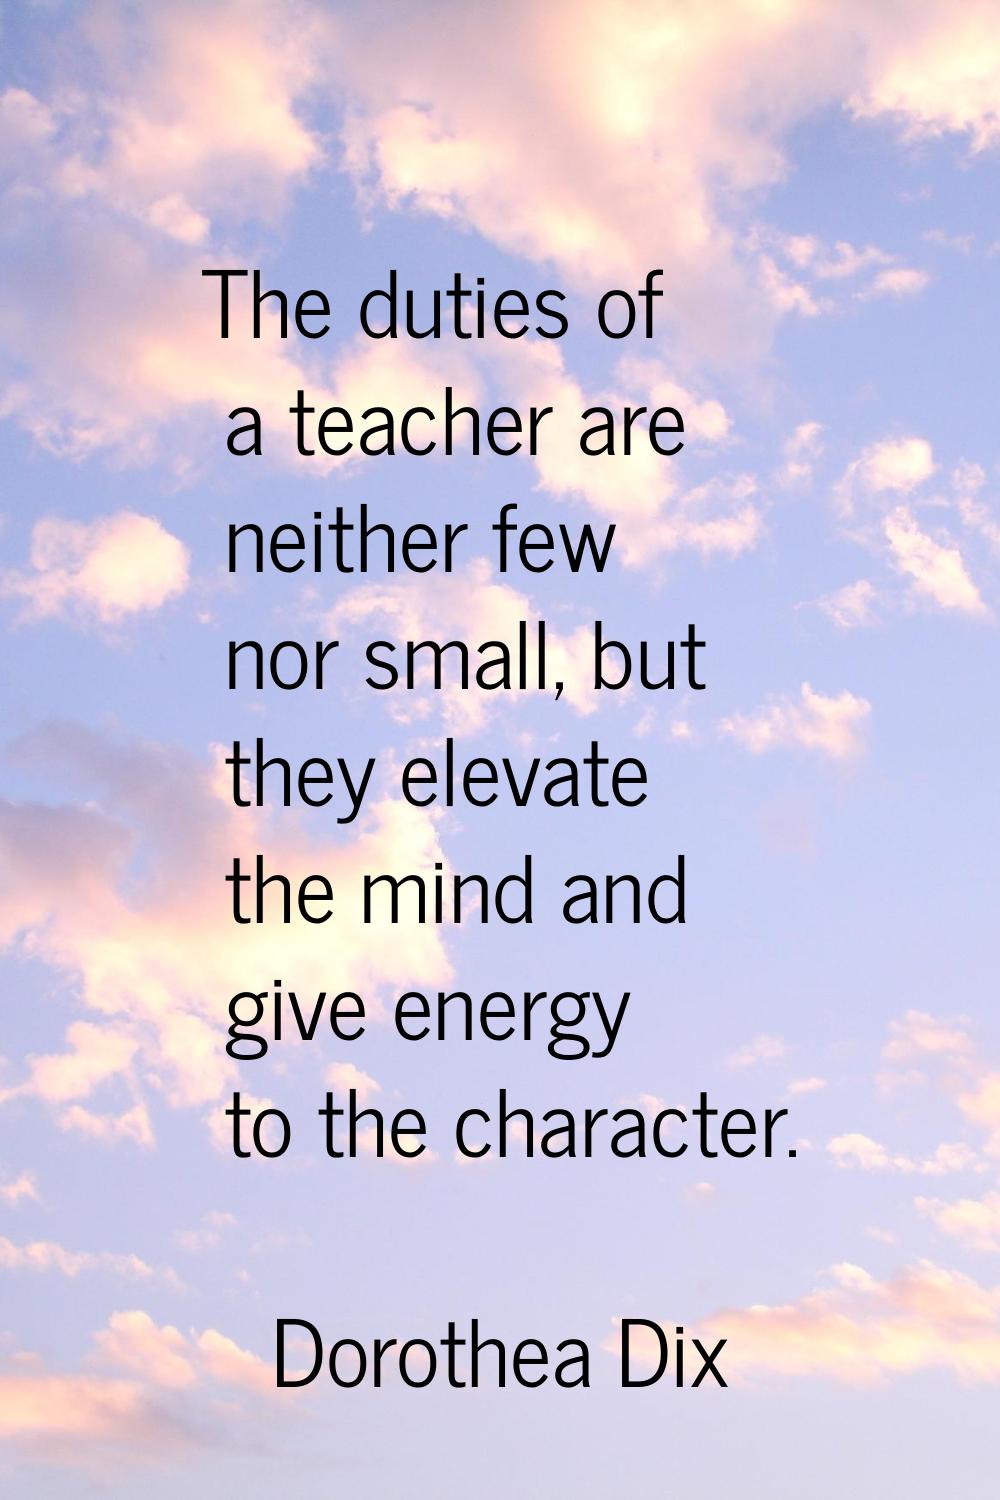 The duties of a teacher are neither few nor small, but they elevate the mind and give energy to the